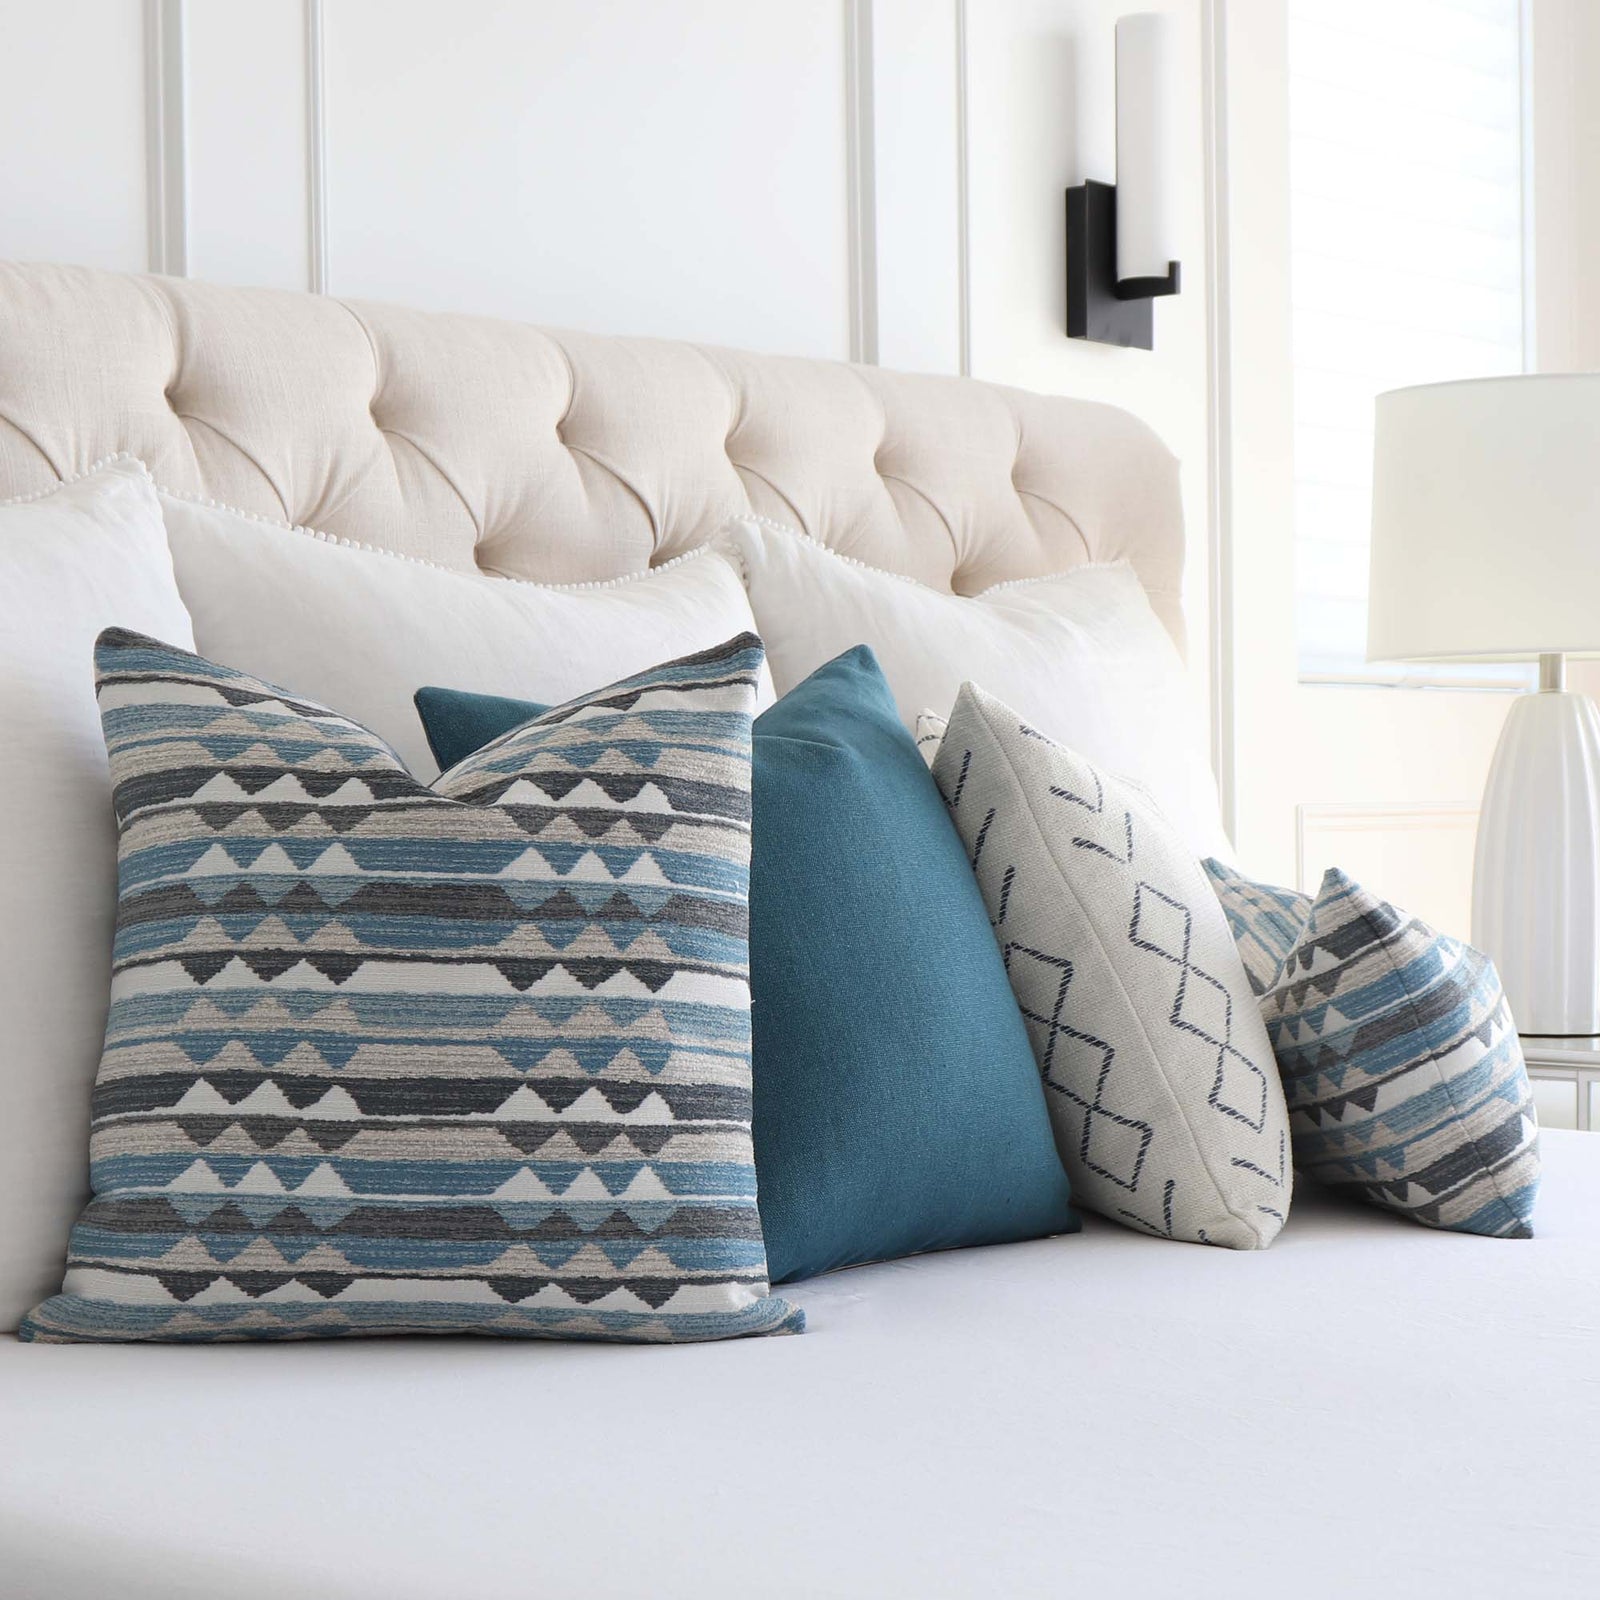 https://www.chloeandolive.com/cdn/shop/files/Thibaut_InsideOut_Performance_Fabric_Saranac_Waterfall_Blue_Woven_Ikat_Kilim_Patttern_Designer_Luxury_Throw_Pillow_Cover_in_Bedroom_with_Matching_Throw_Pillows_1600x.jpg?v=1692677727